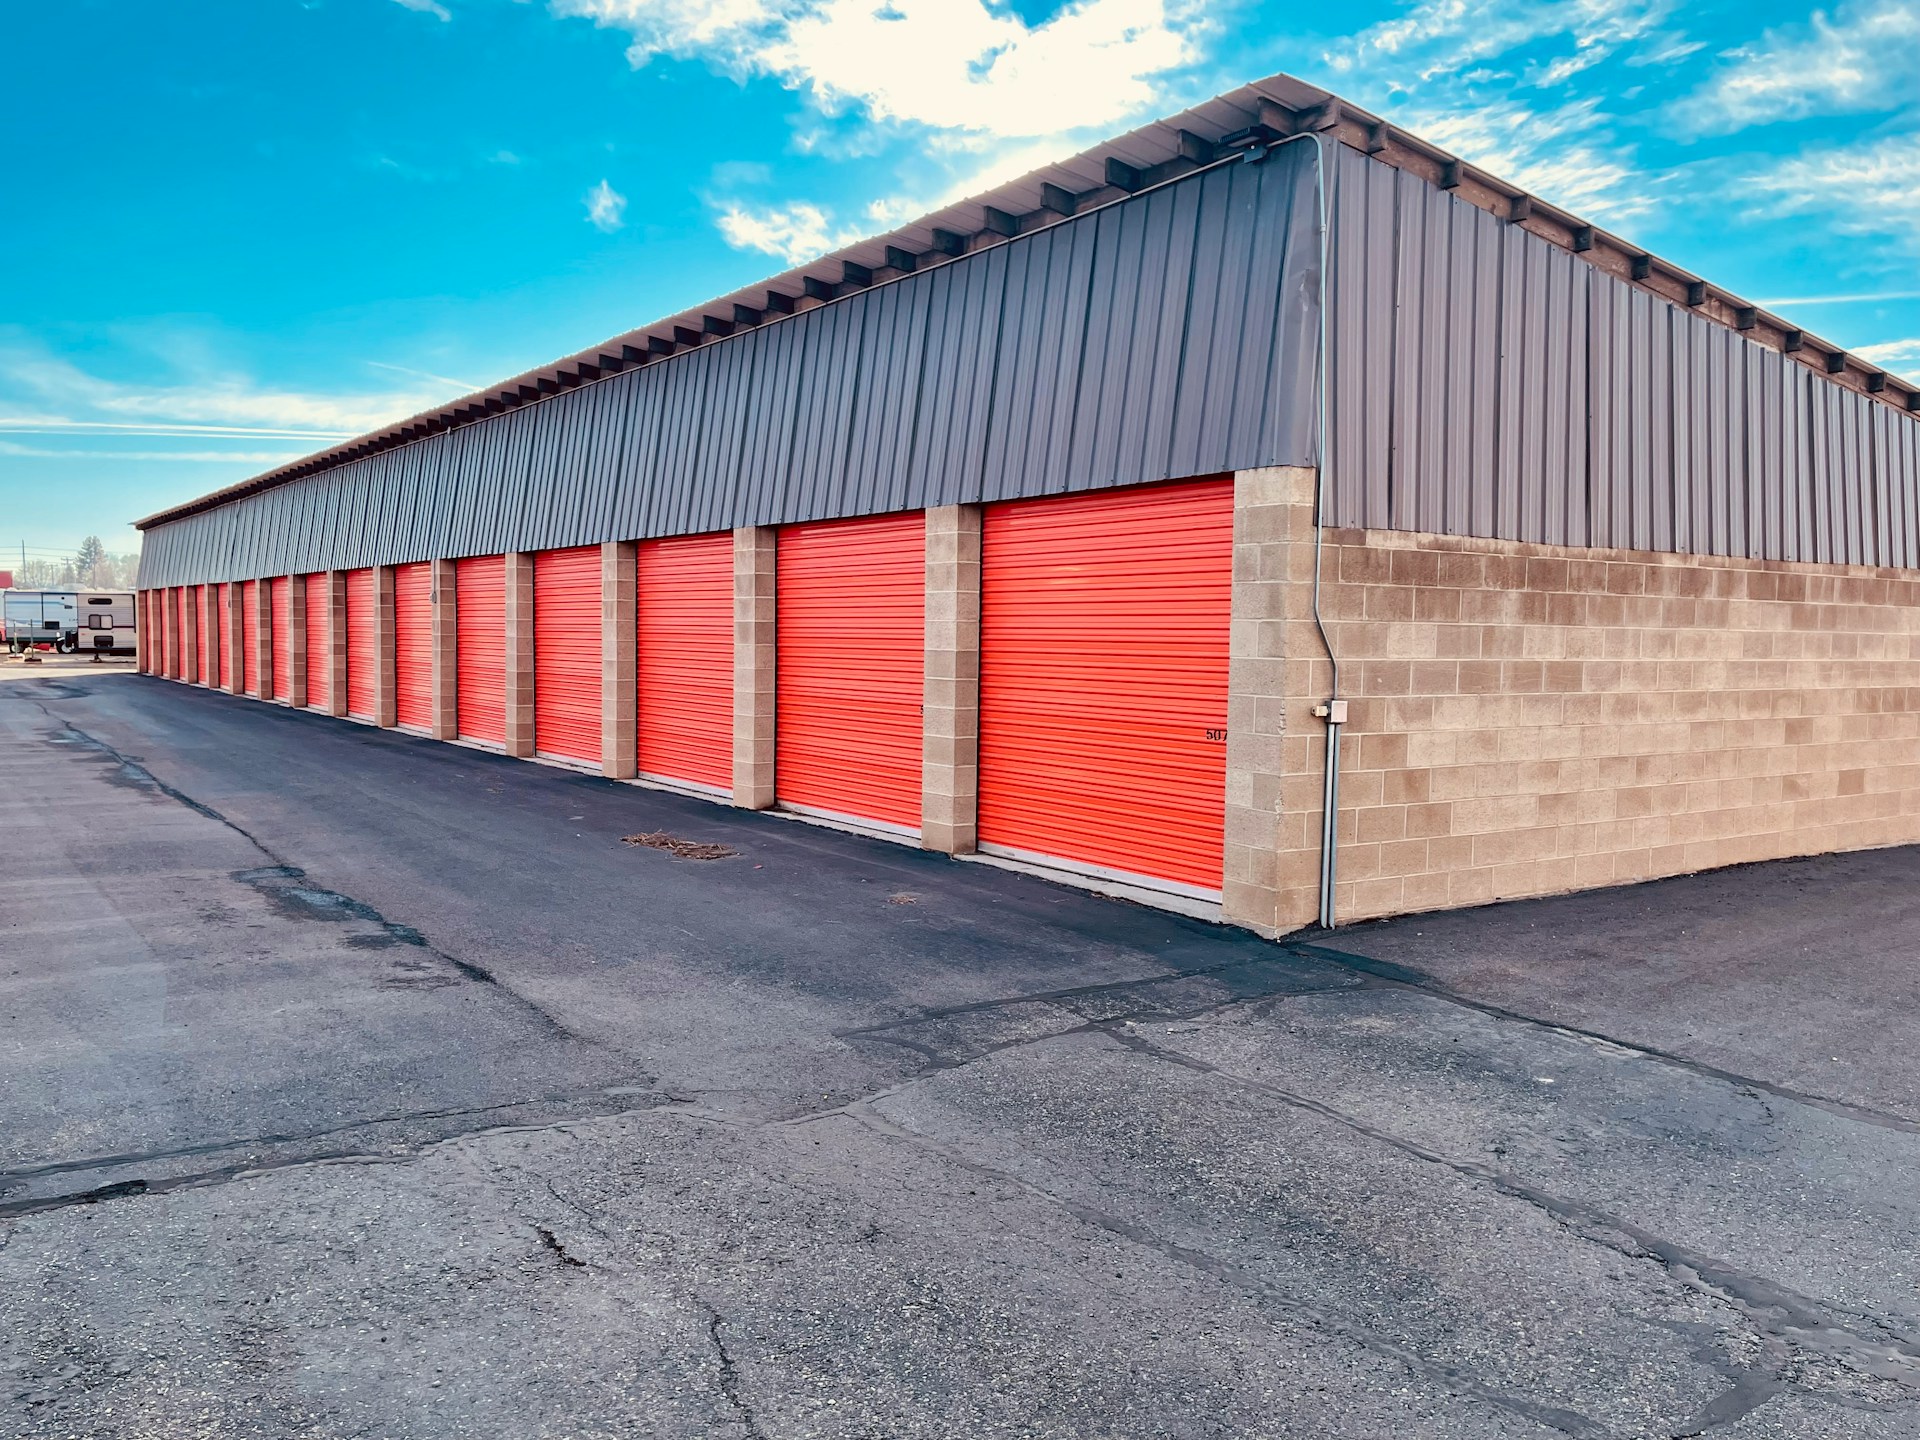 When Can a Storage Unit Lock You Out? Understanding Contracts & Legal Rights